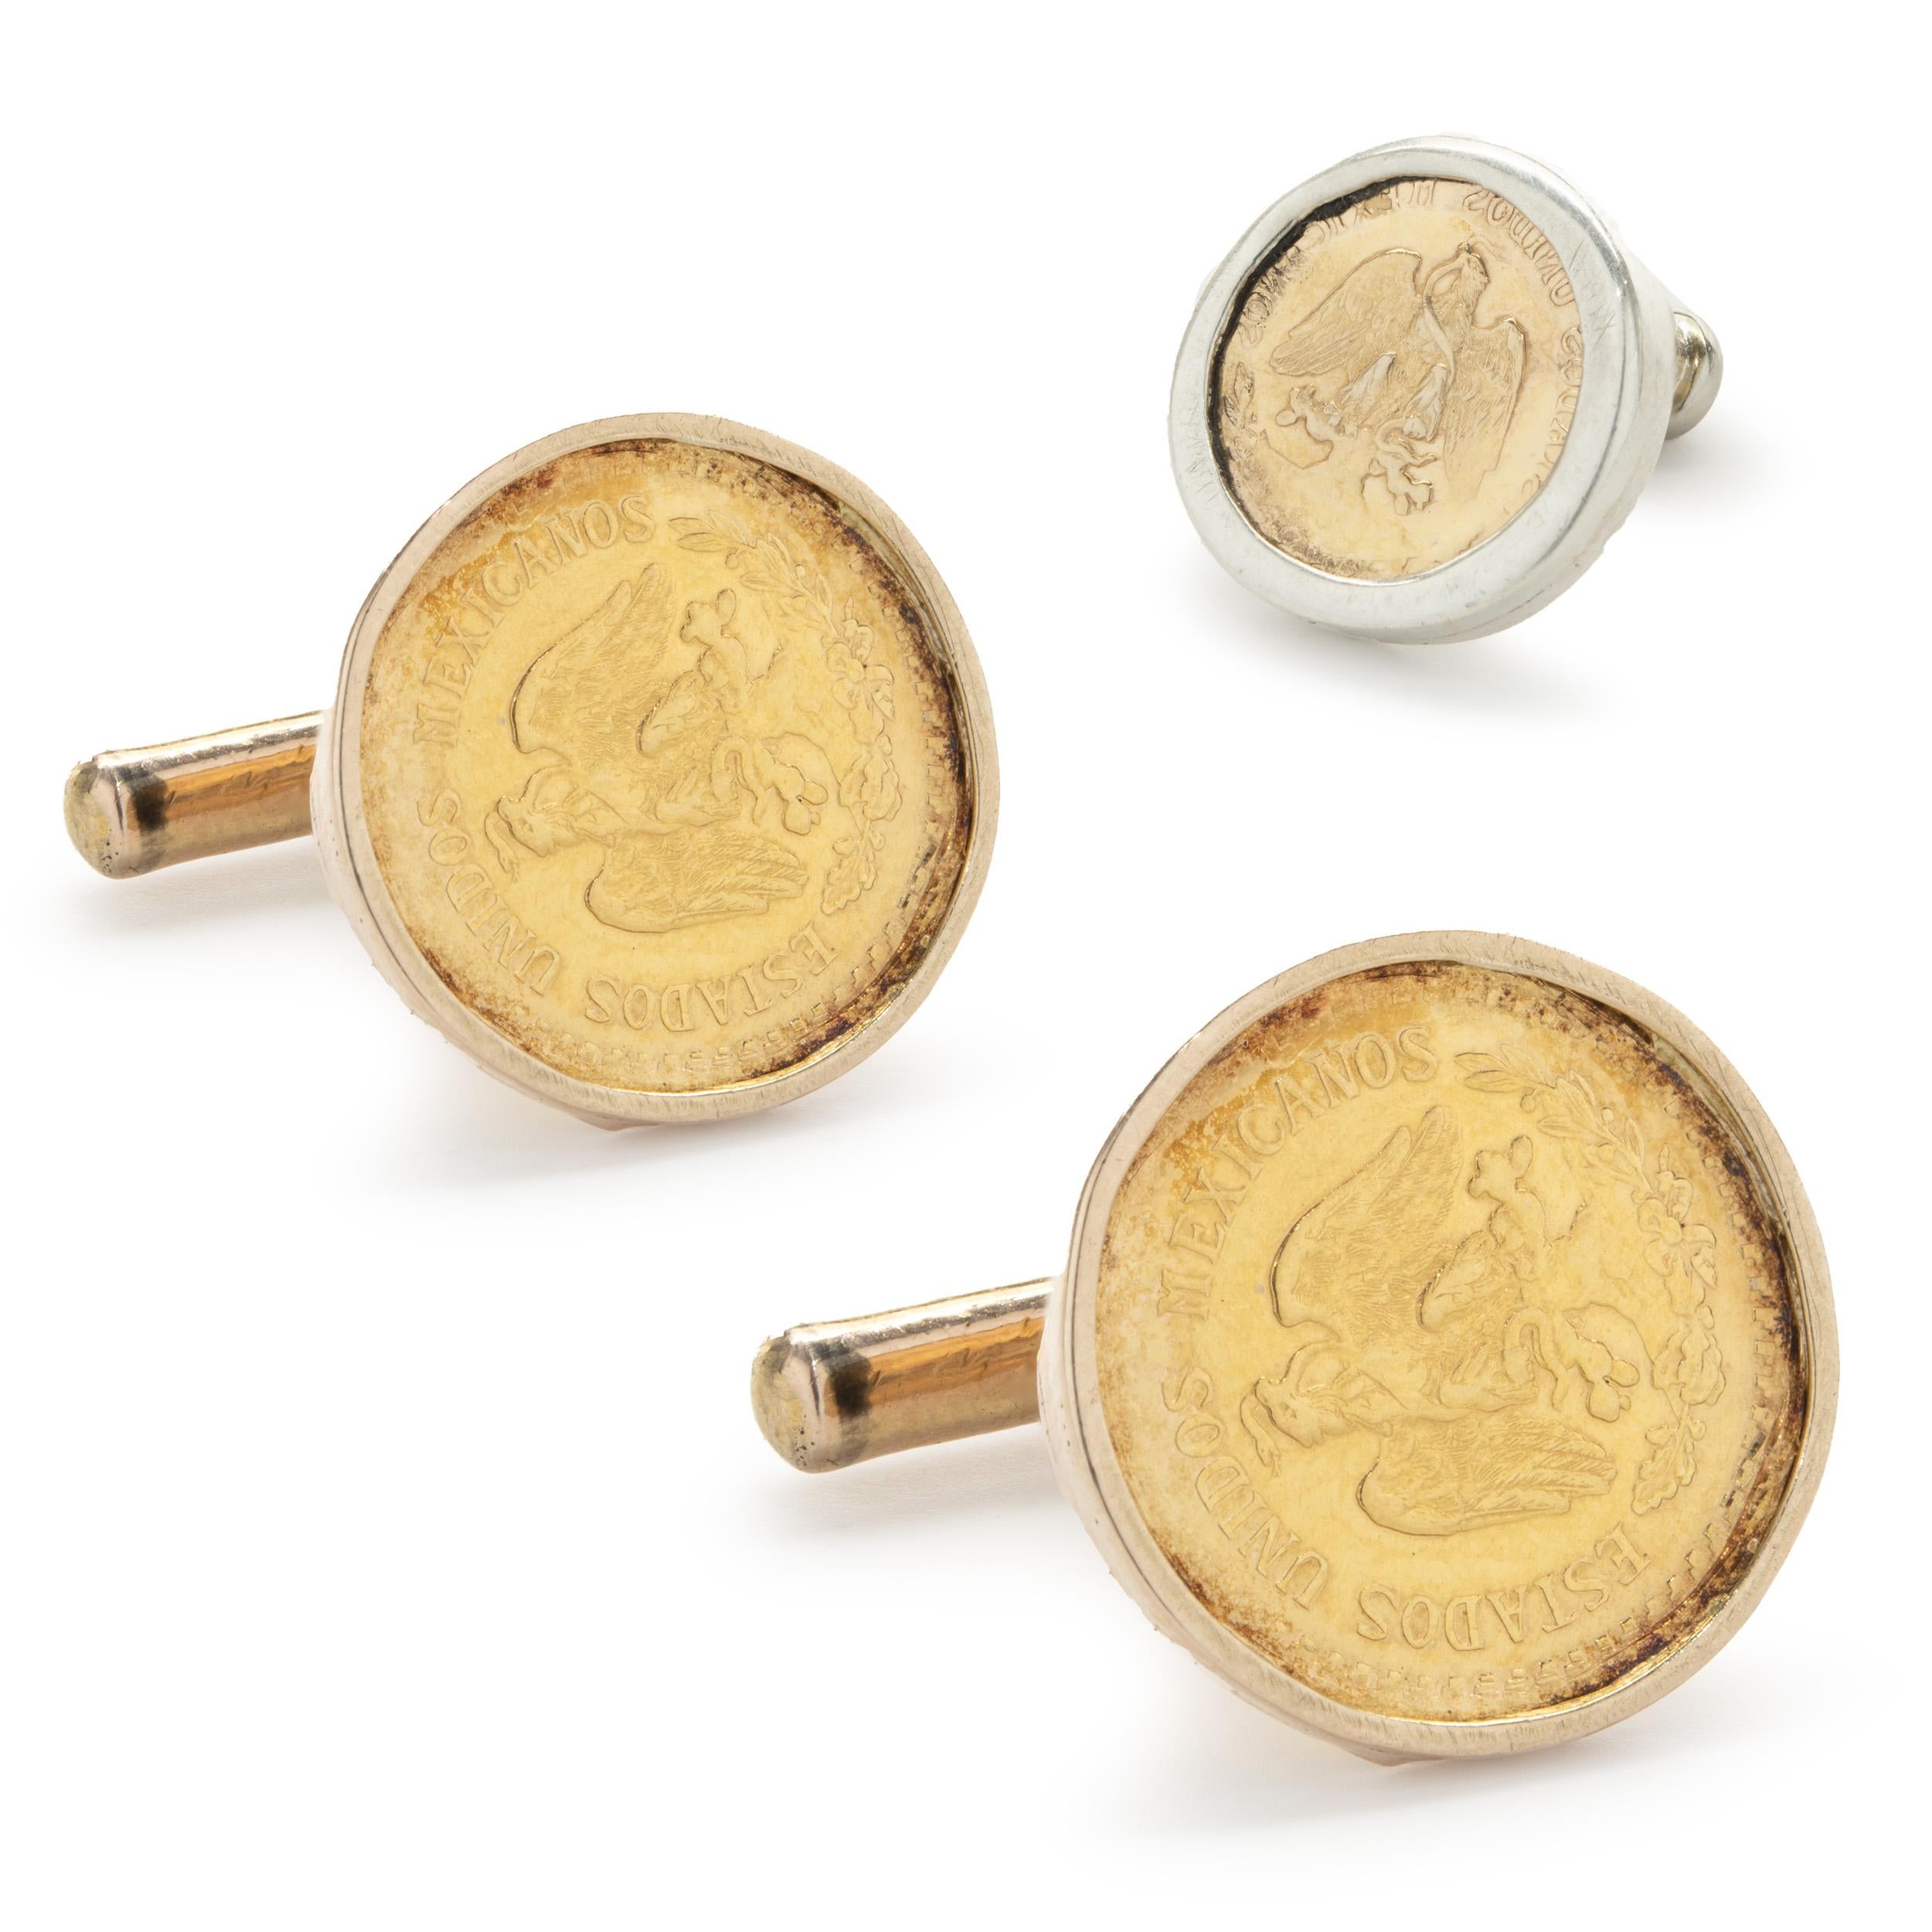 Material: Mexican Peso
Dimensions: cufflinks measure 16.50mm 
Weight: 12.51 grams